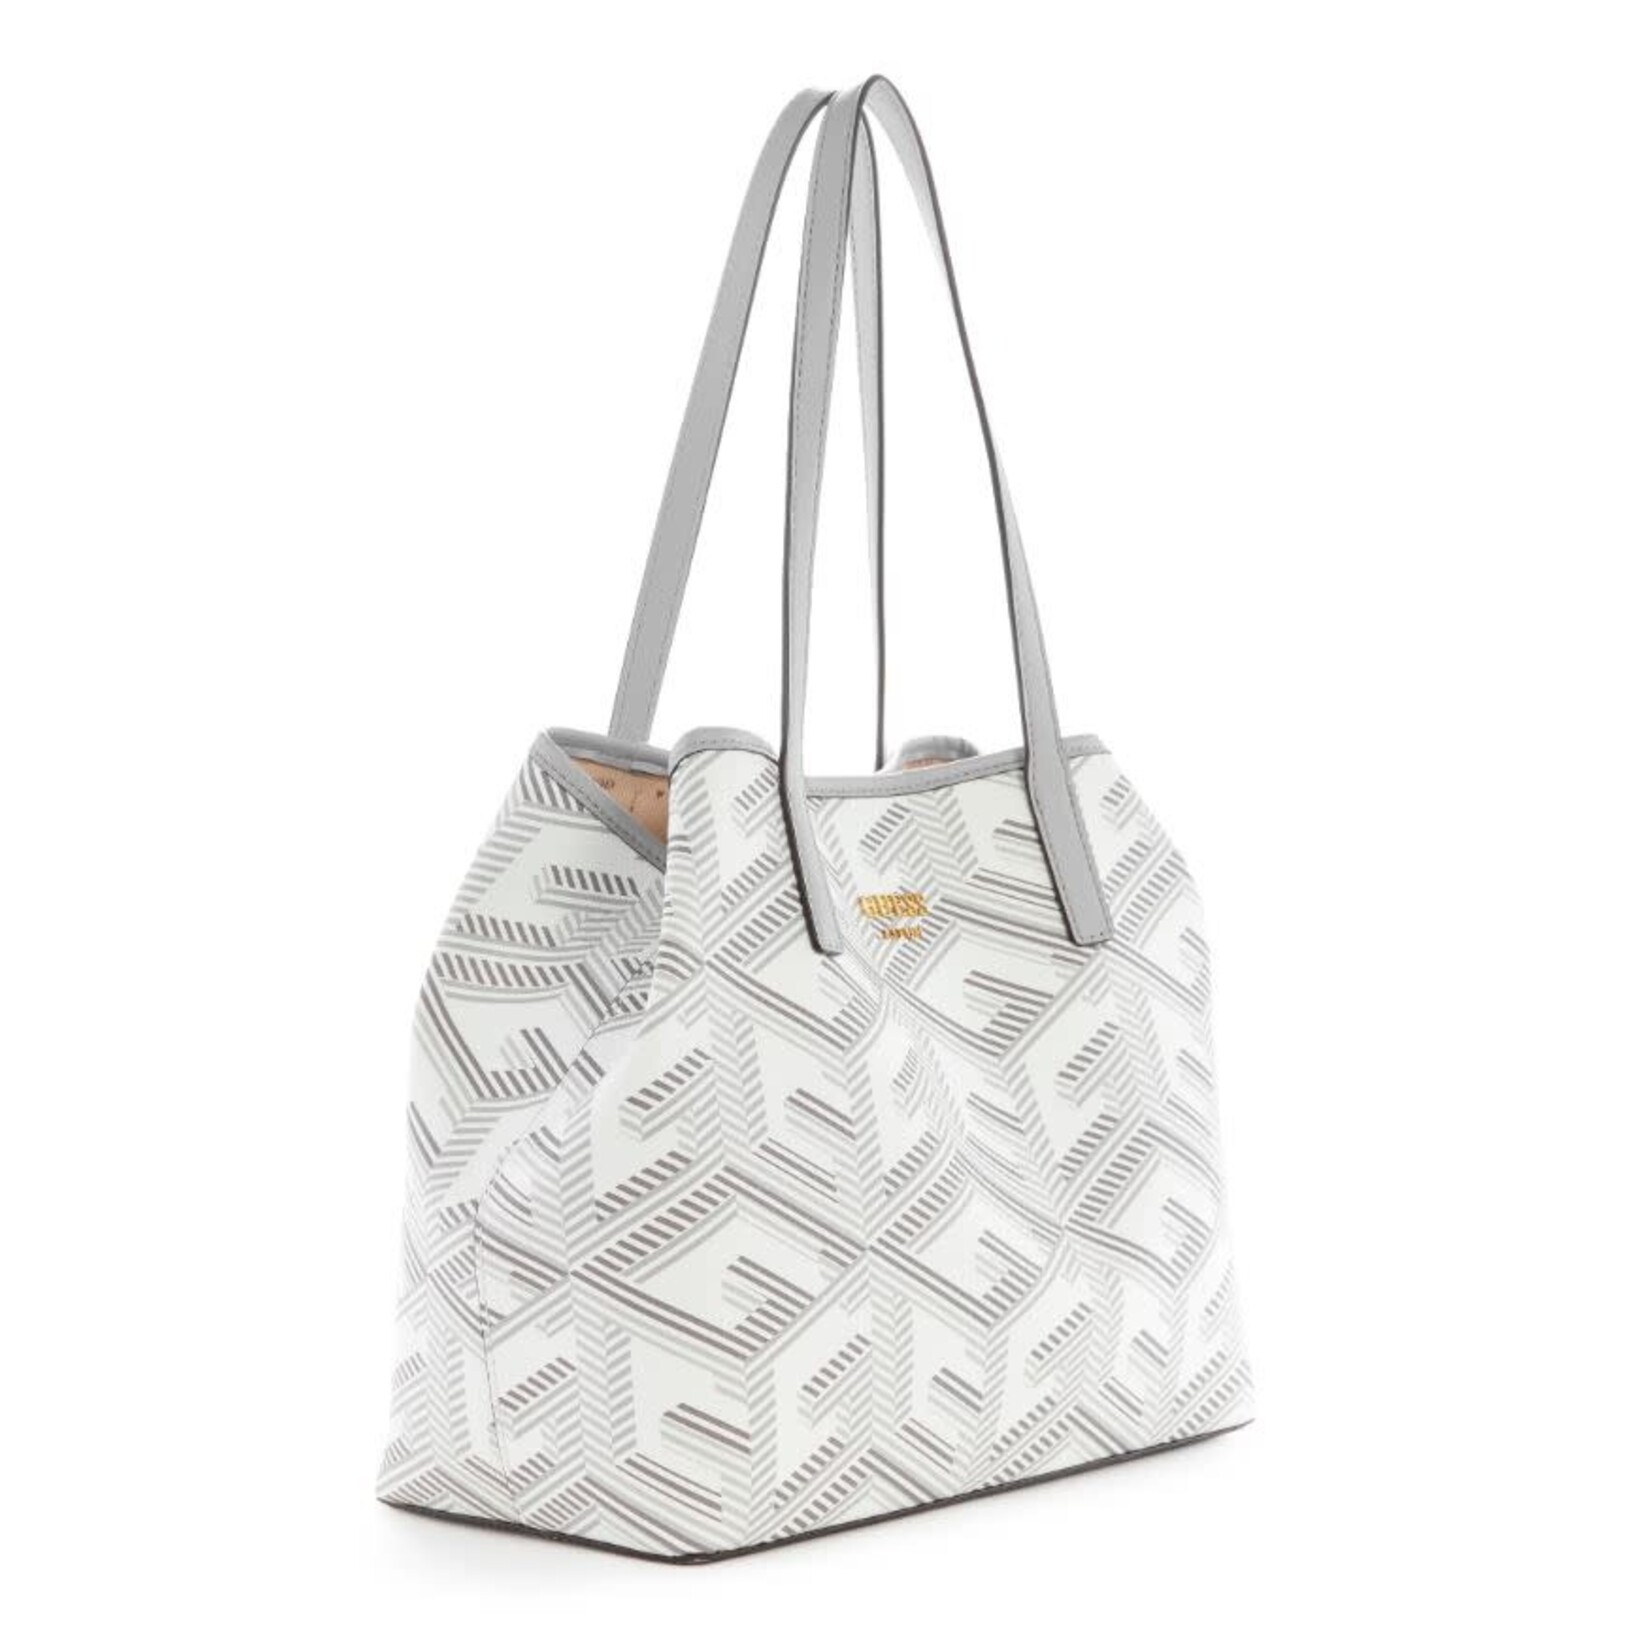 GUESS Vikky Tote